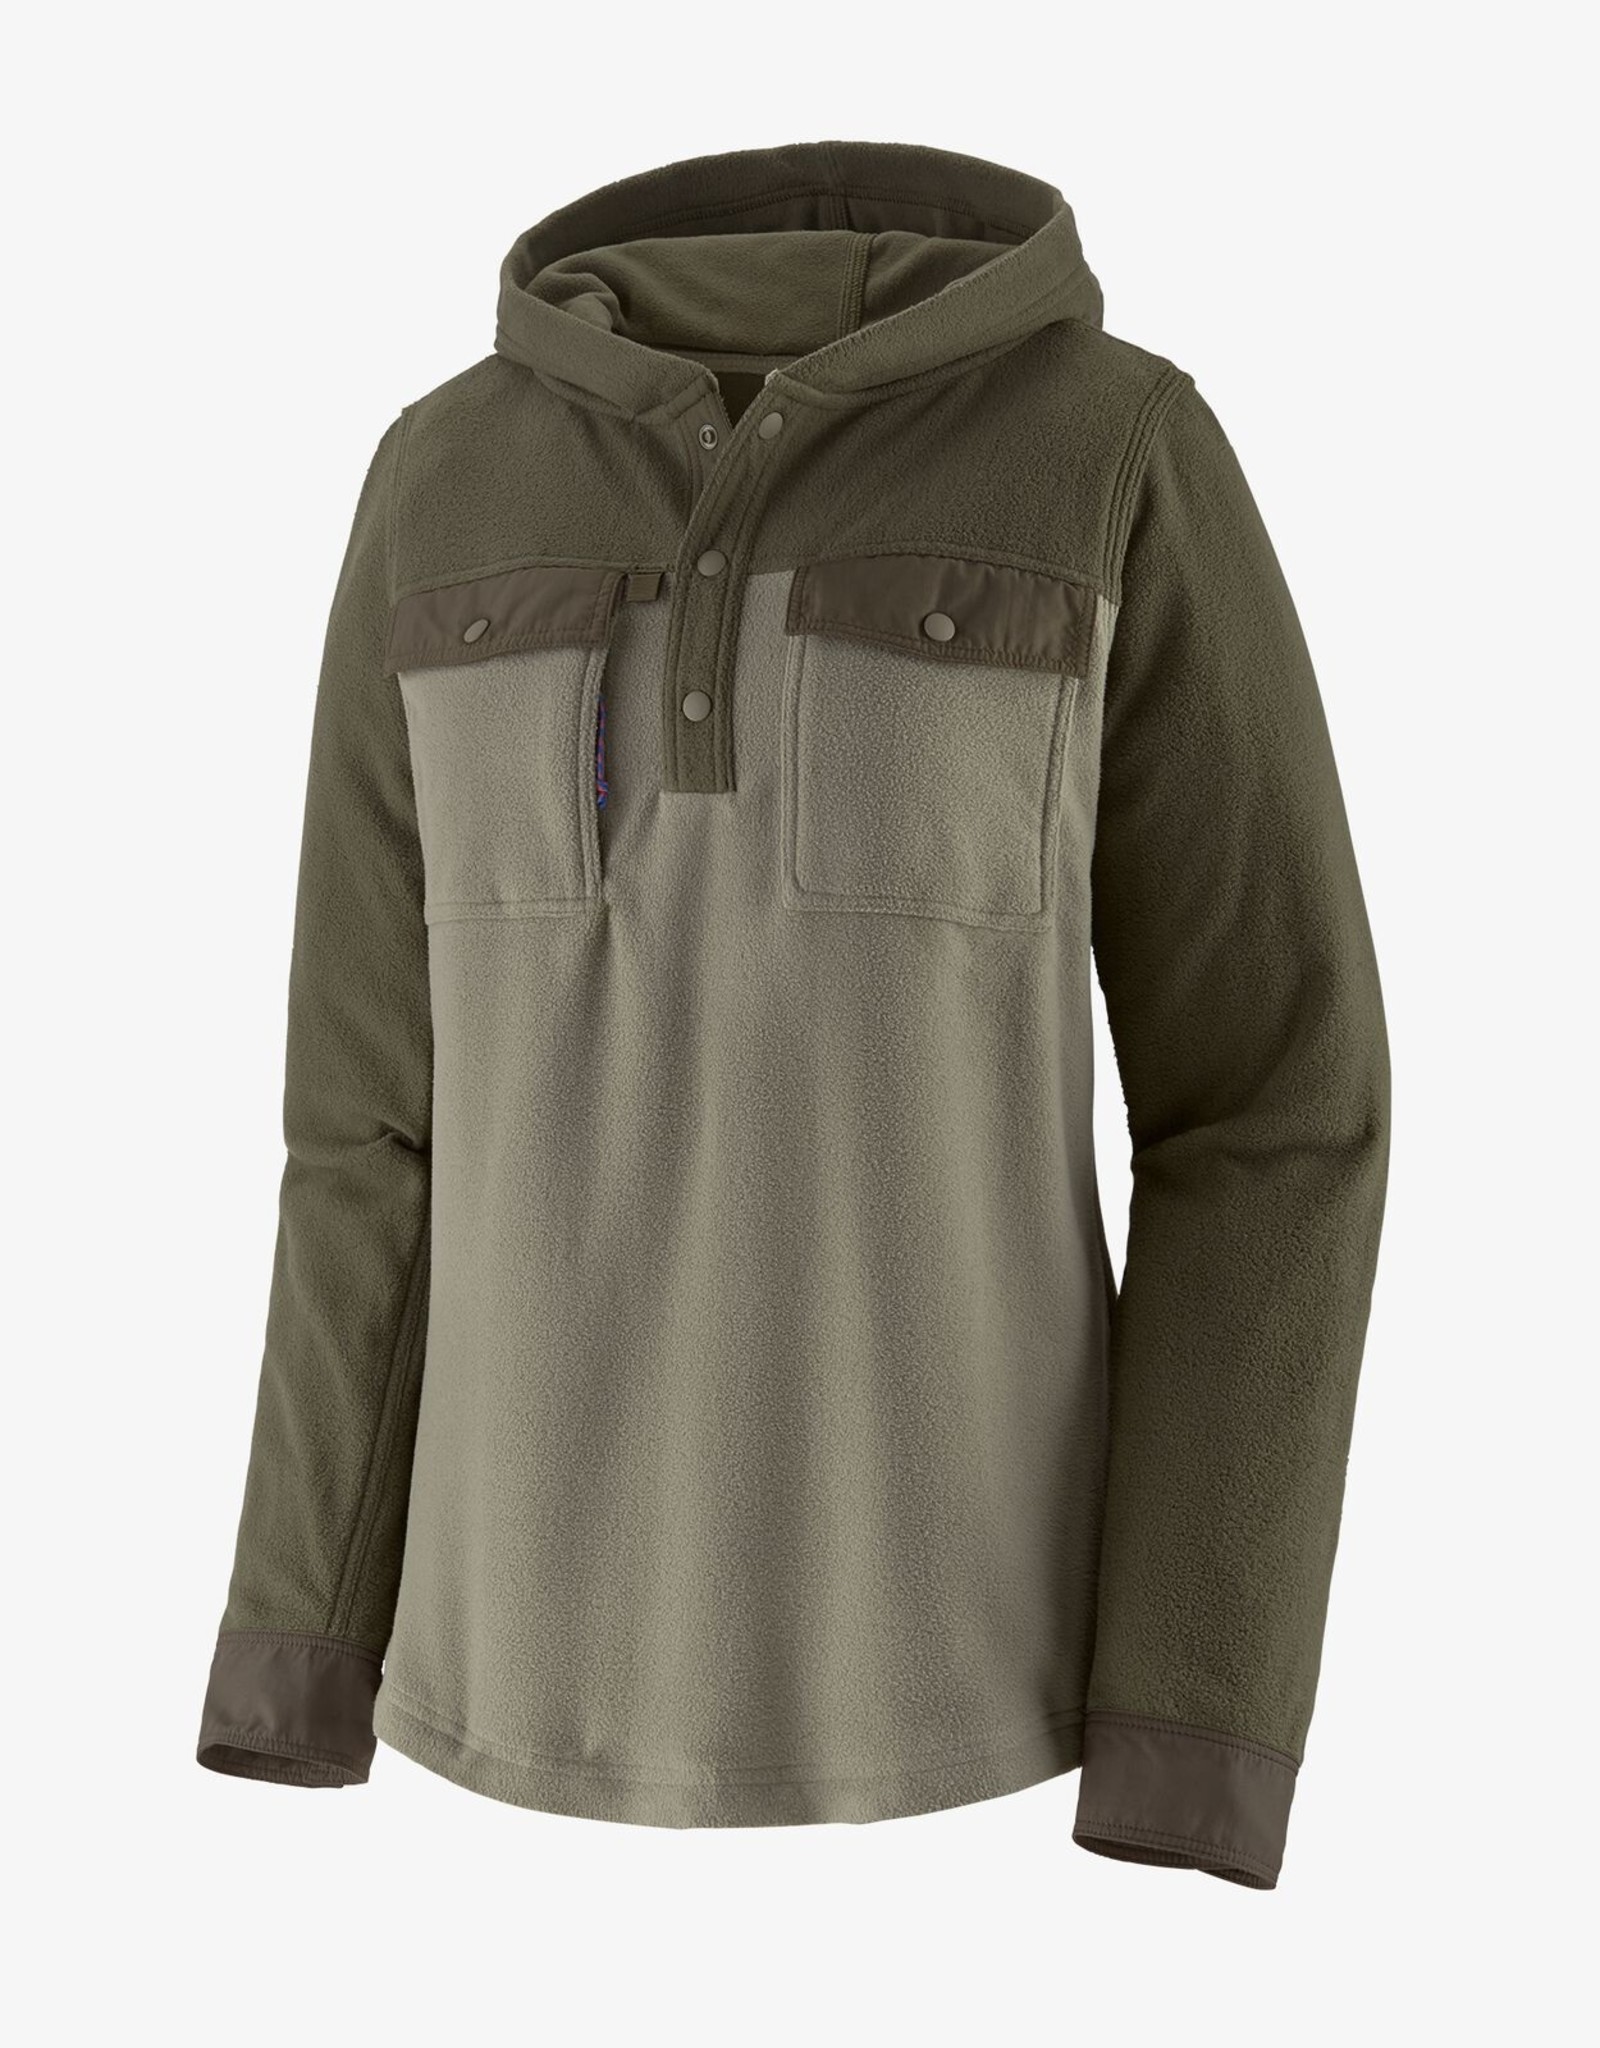 Patagonia Chandail Patagonia Femme Early Rise